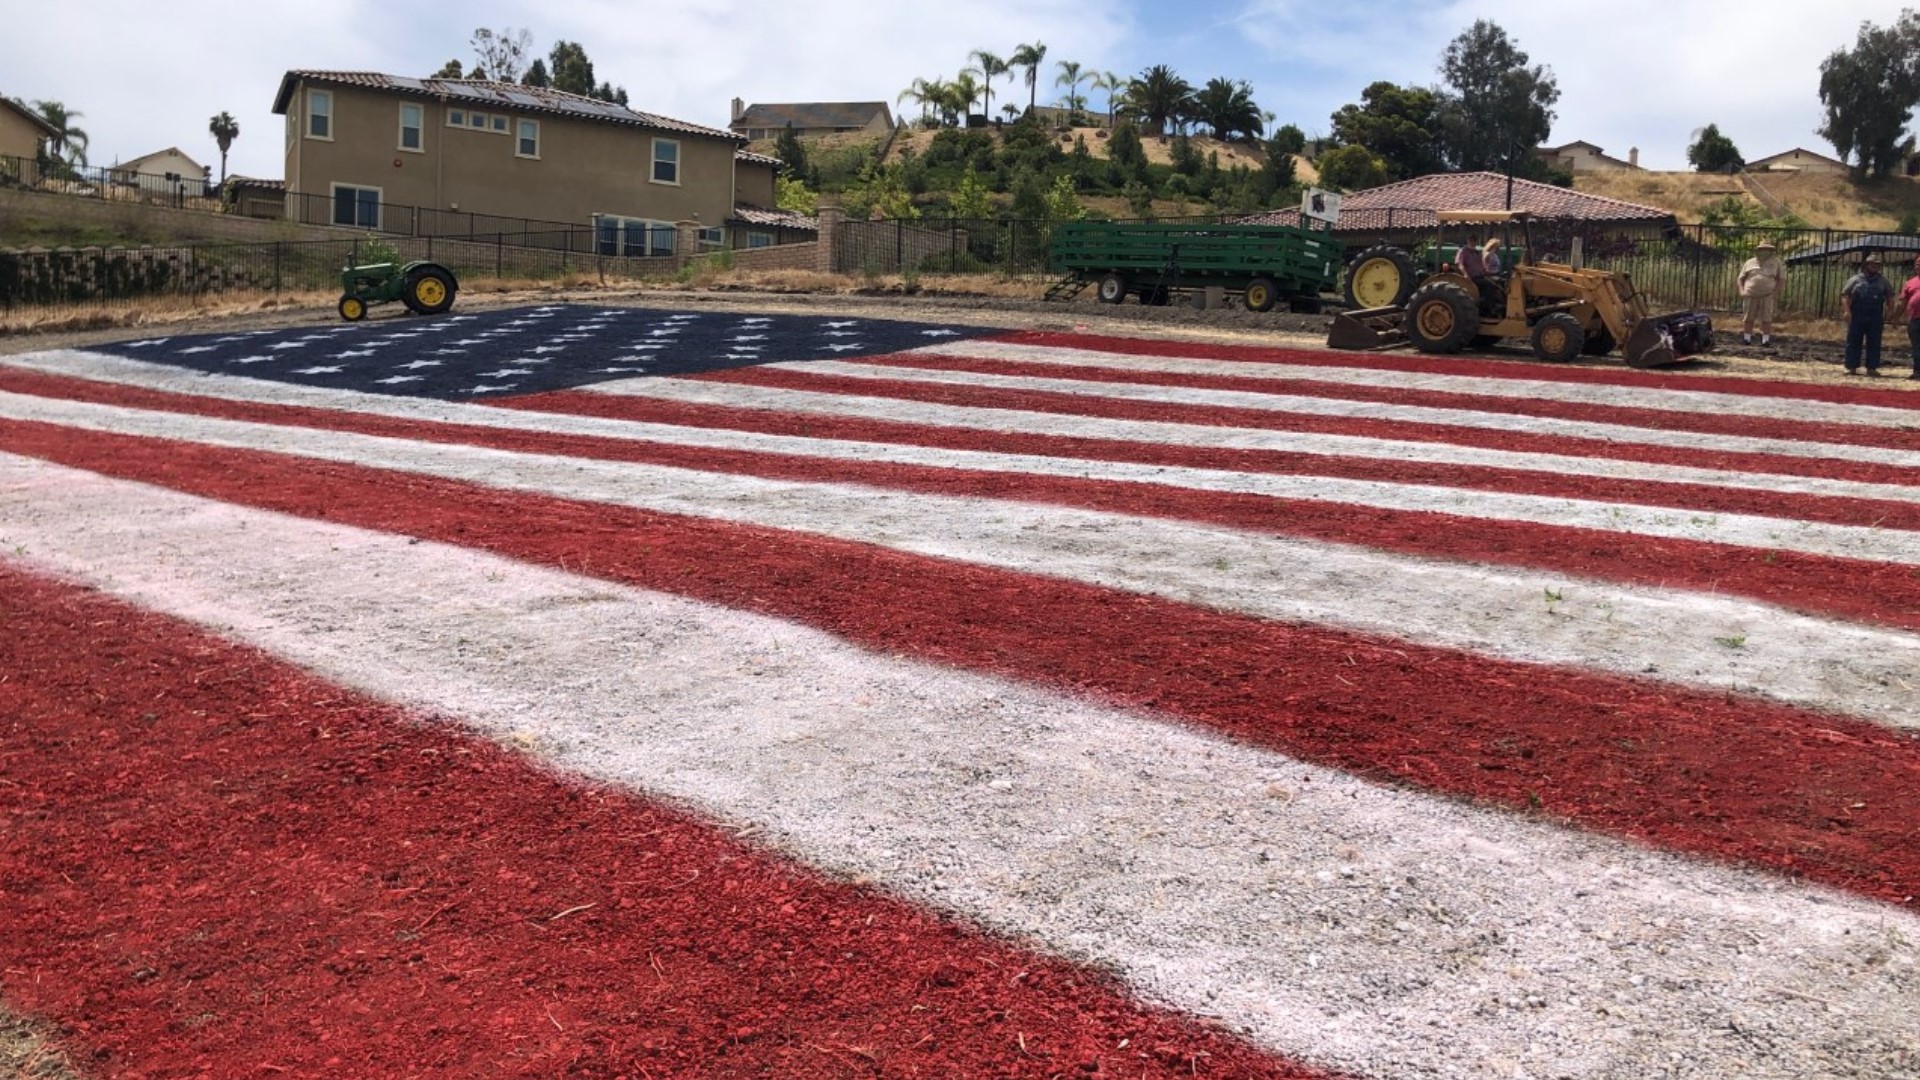 An 11,000 square foot American flag painted on a large field at the Antique Gas and Steam Engine Museum in north San Diego.